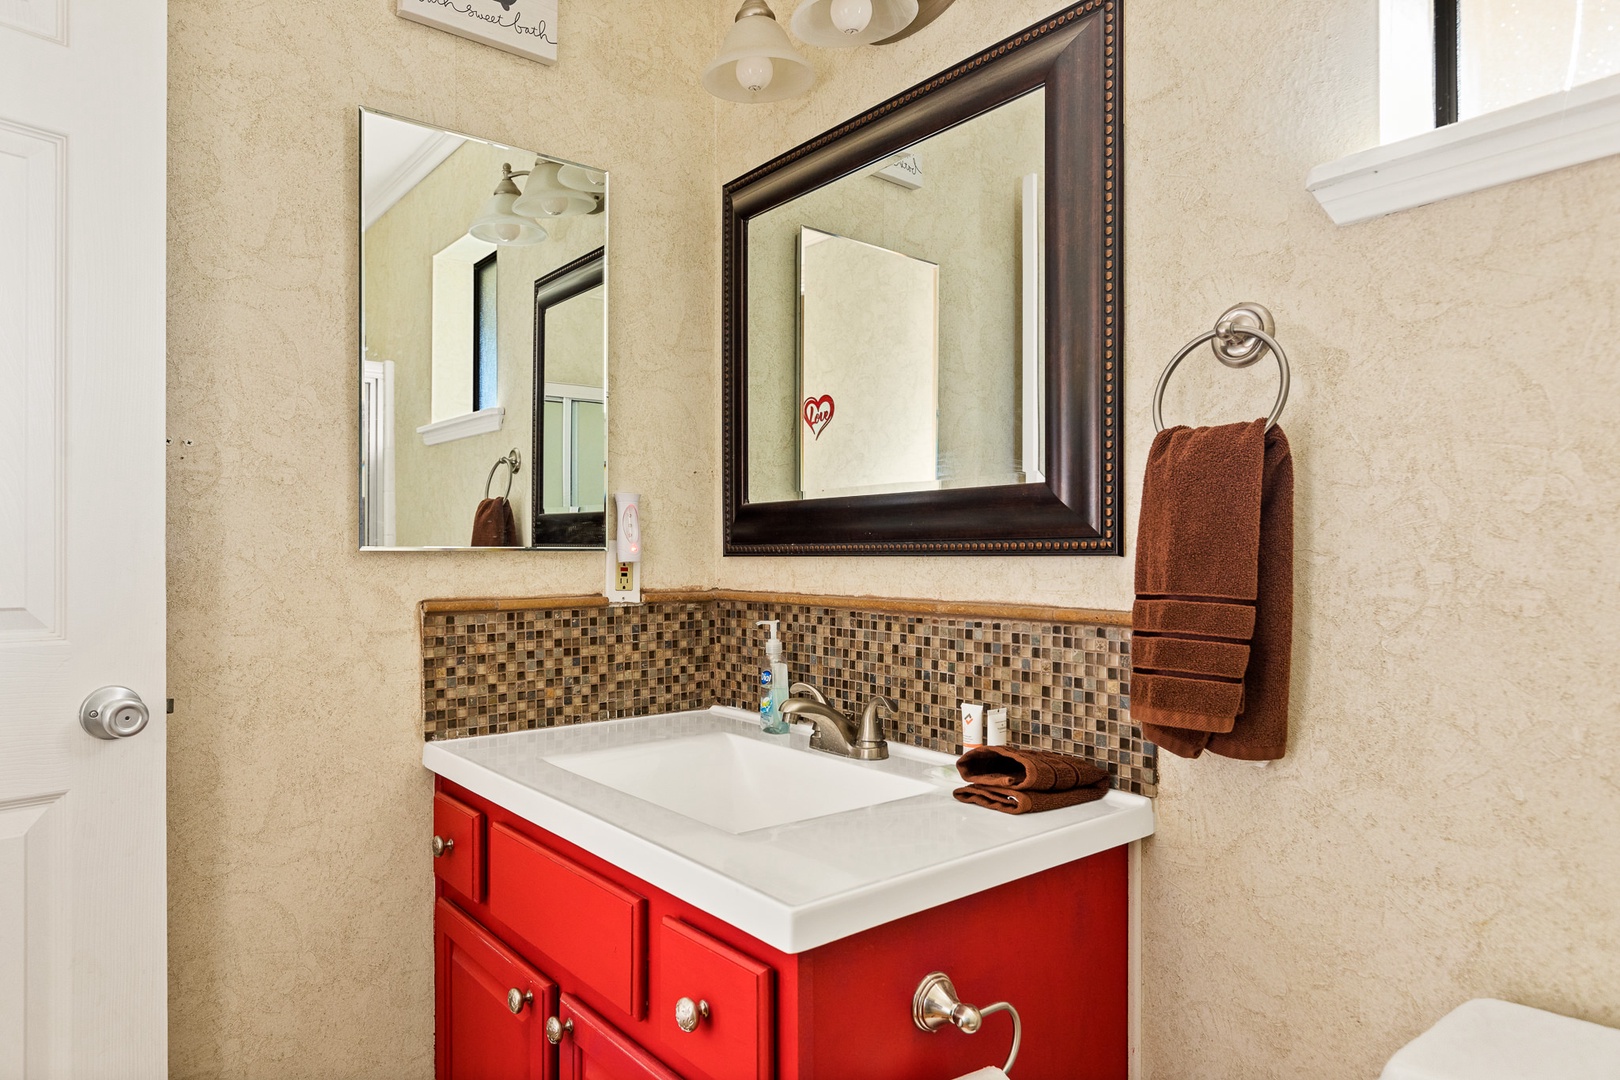 A second full bath includes a single vanity & shower/tub combo